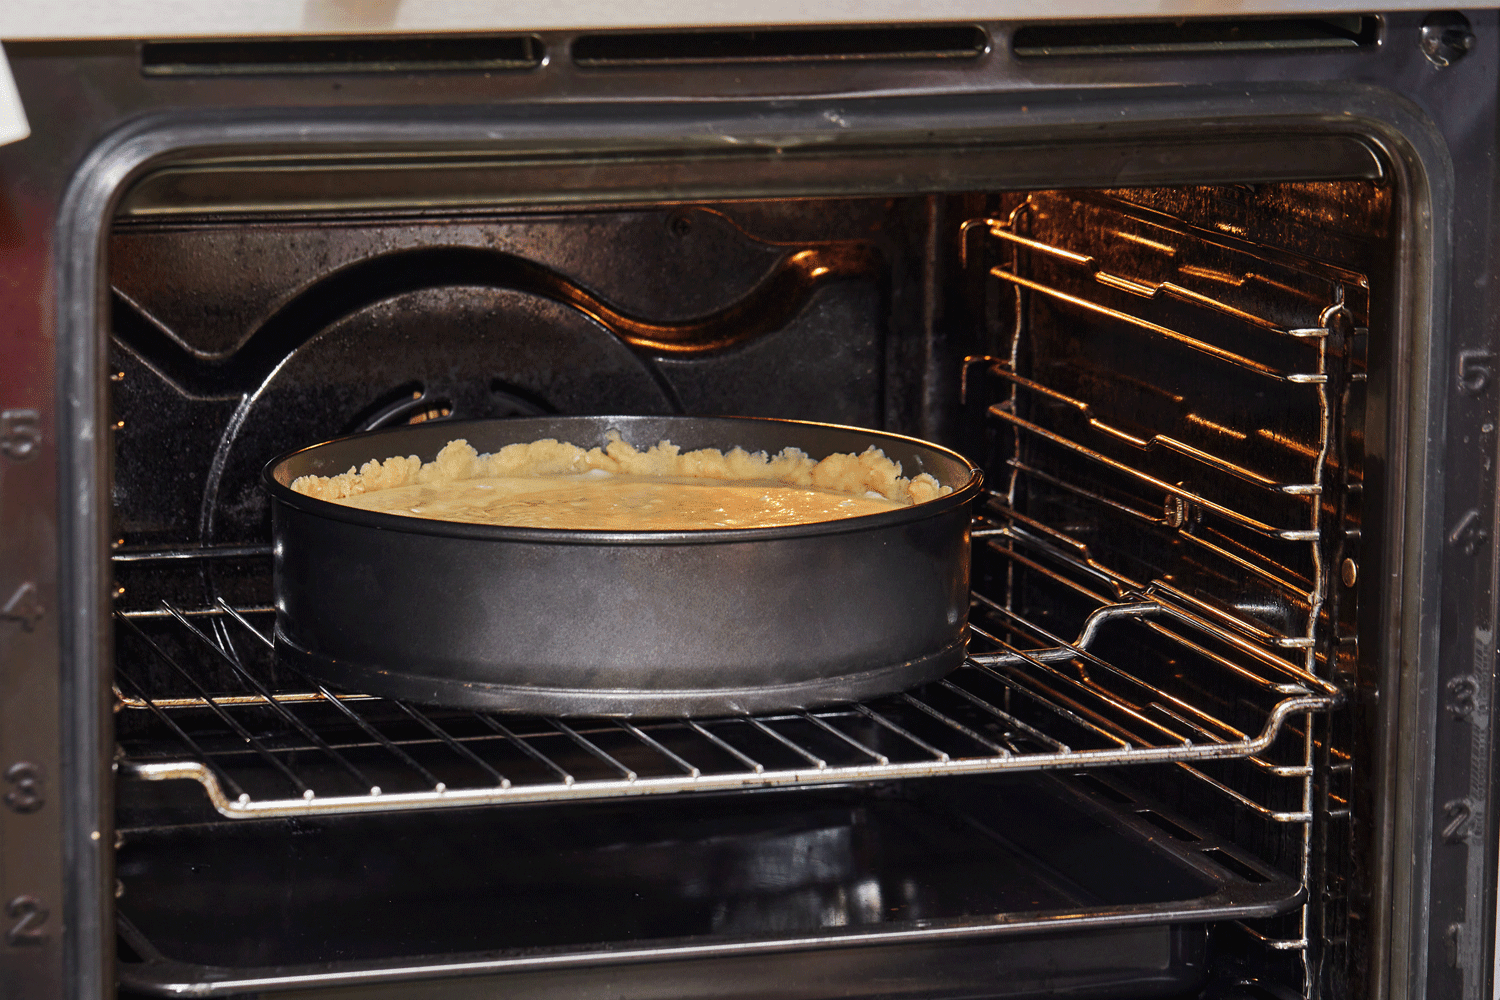 Cheesecake in the oven for baking, Step by step recipe from the Internet.